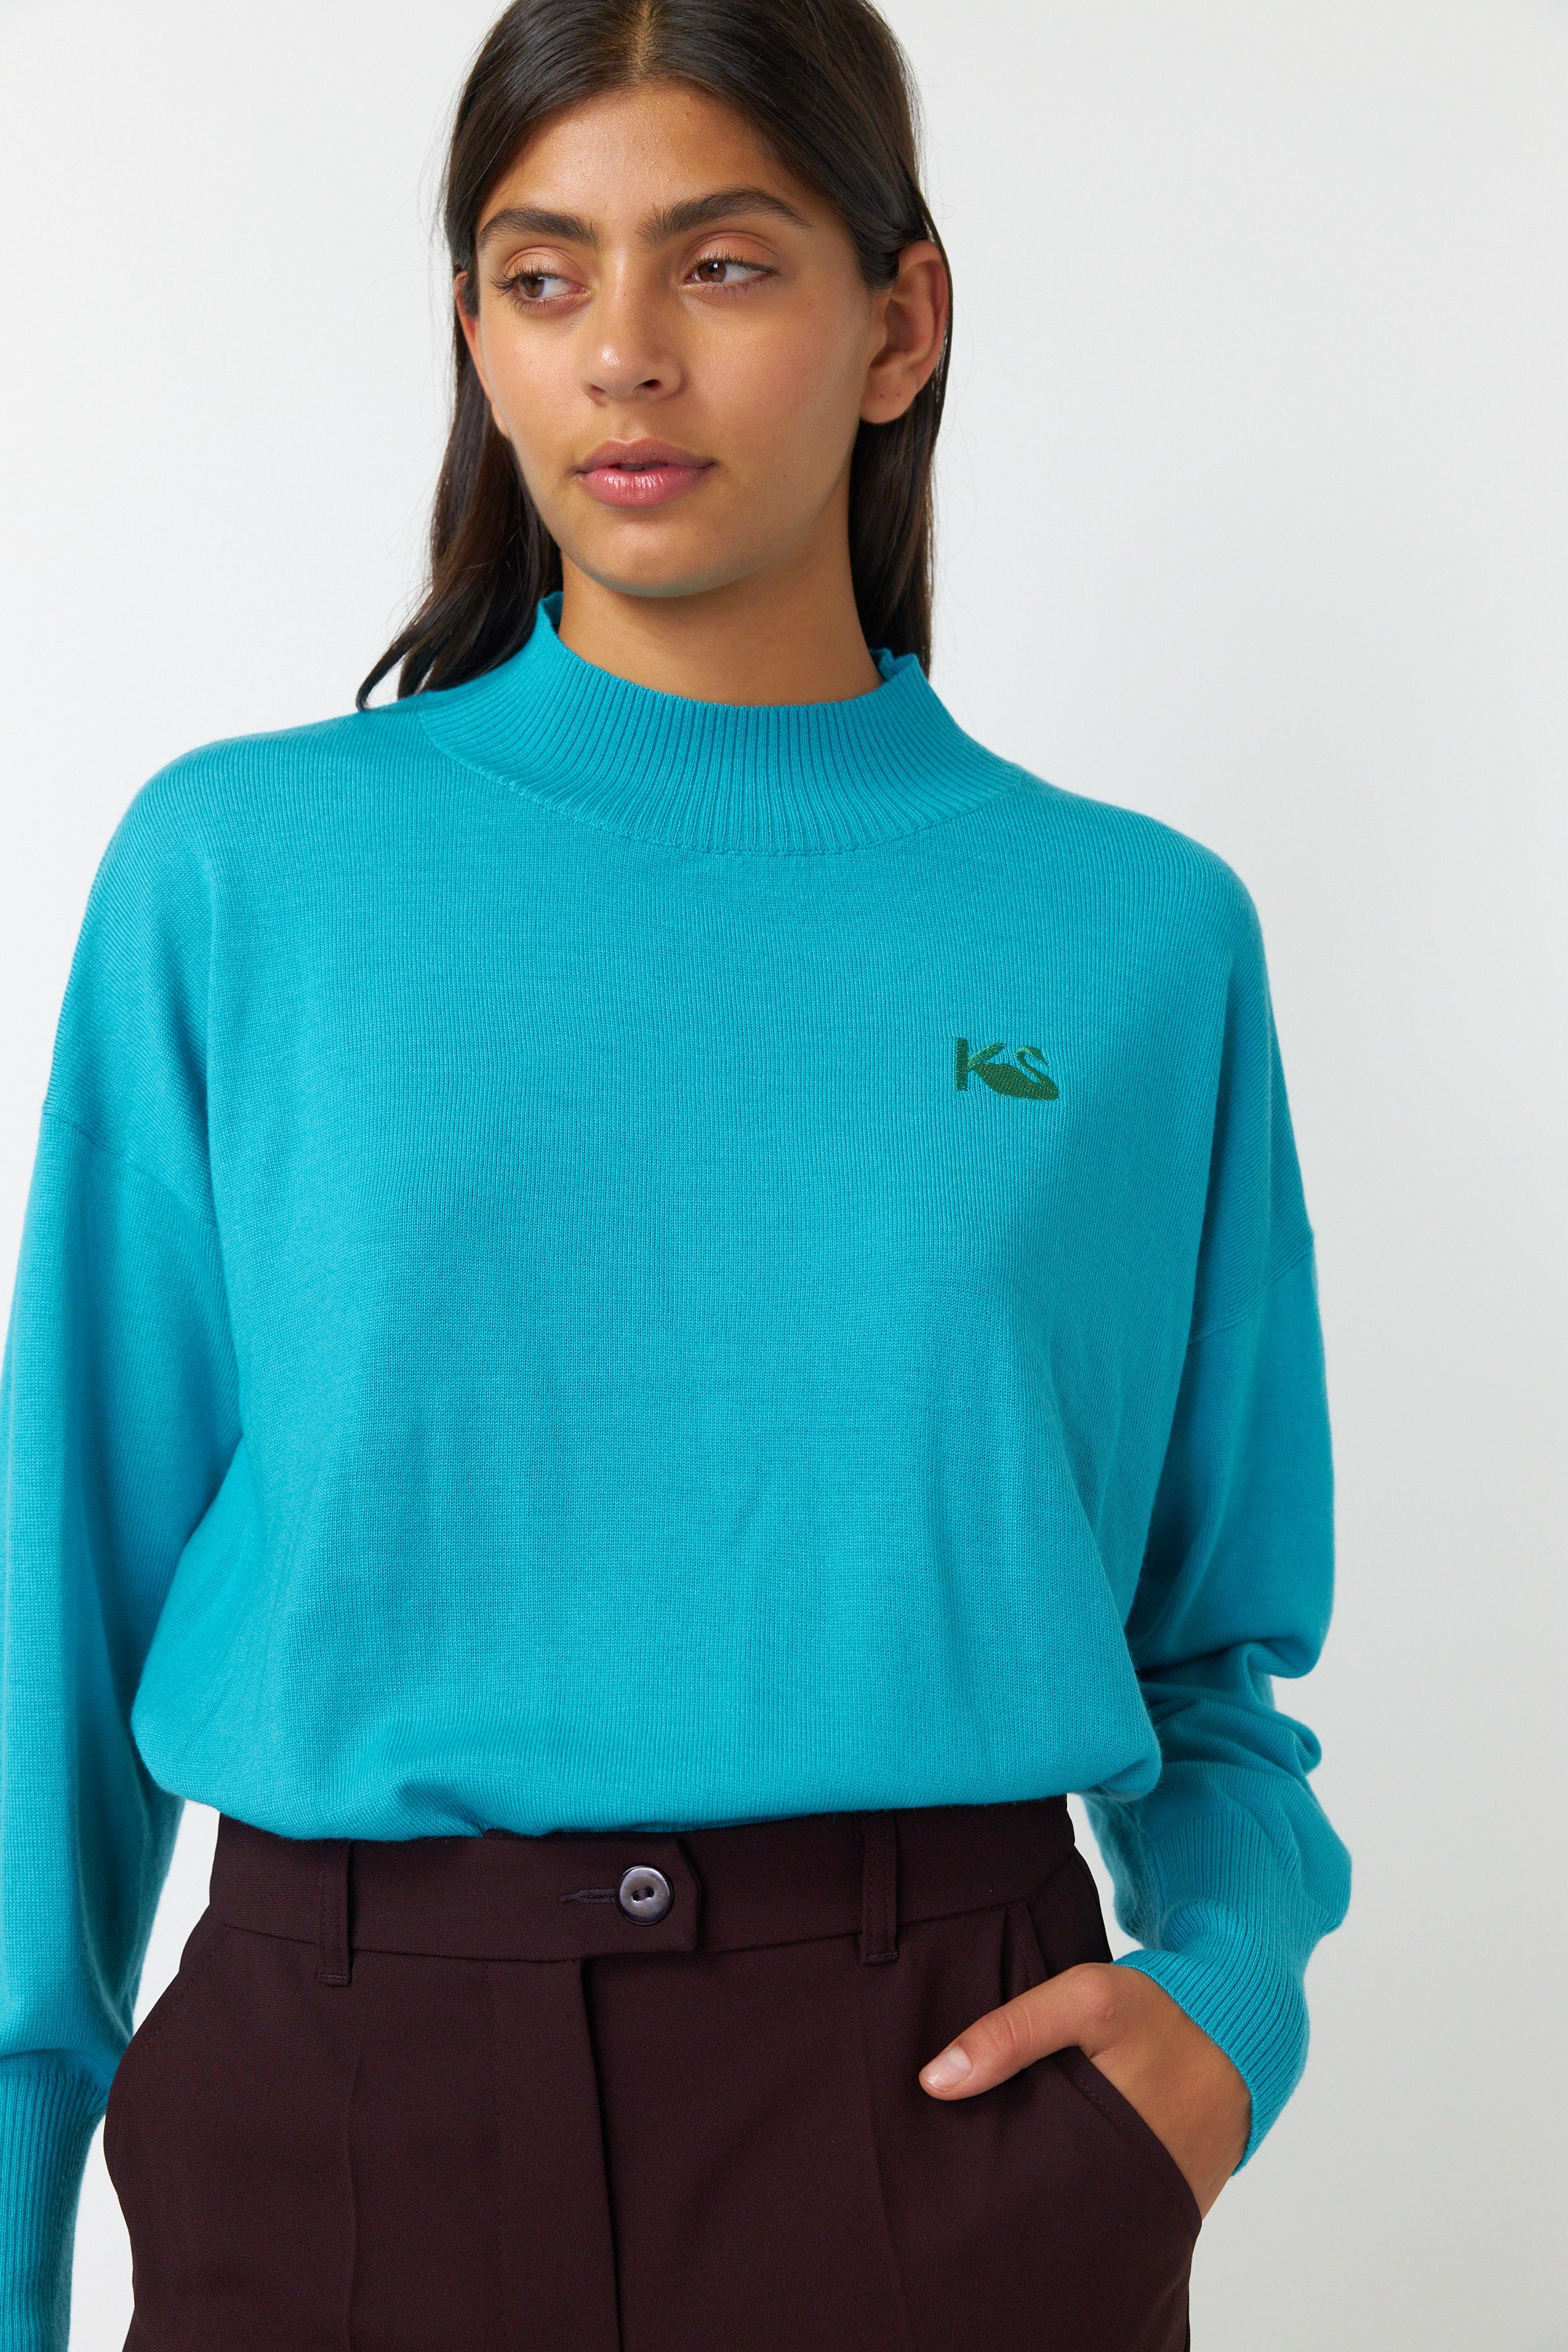 Kate Sylvester Teddy Jumper - Turquoise